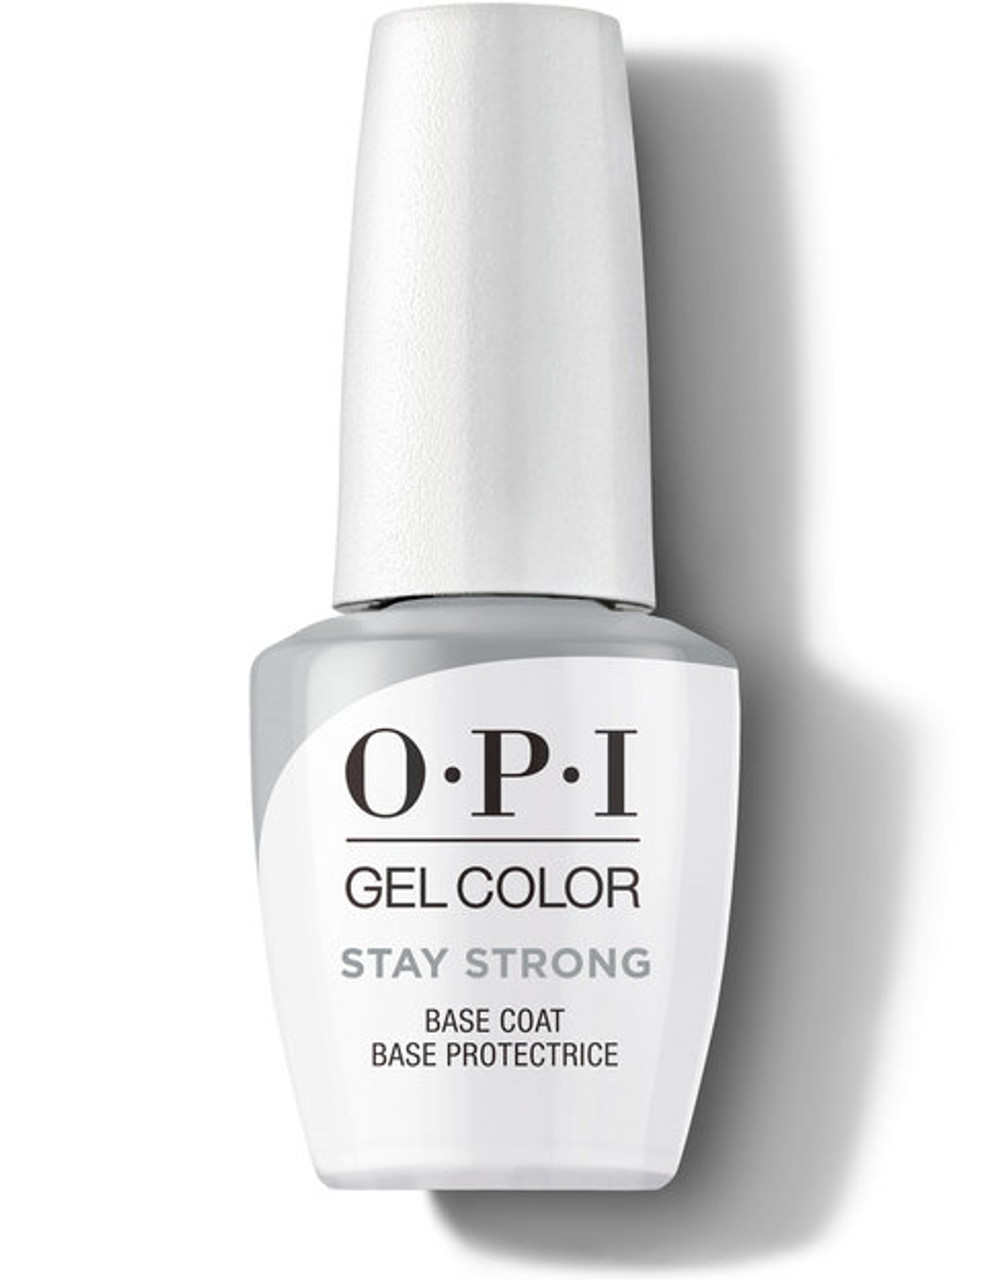 OPI Gel Base and Top Coat Ultimate Review! - YouTube